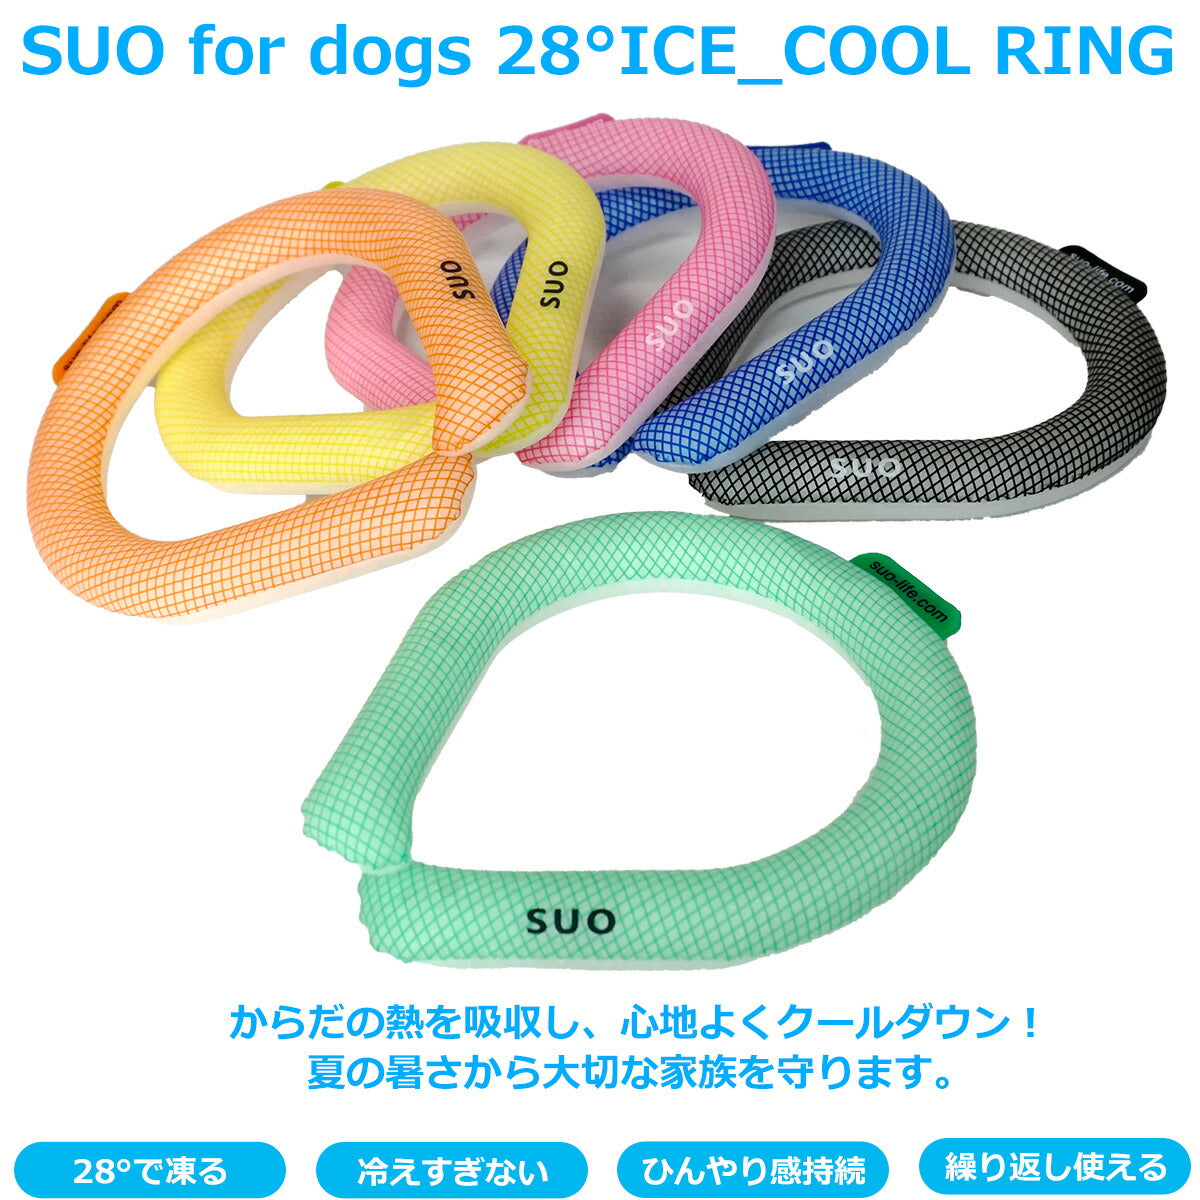 SUO for dogs 28°ICE SUOリング ボタンなし XS ブルー 熱中症対策グッズ 暑さ対策 ひんやり 首 冷感 犬 大人 子供